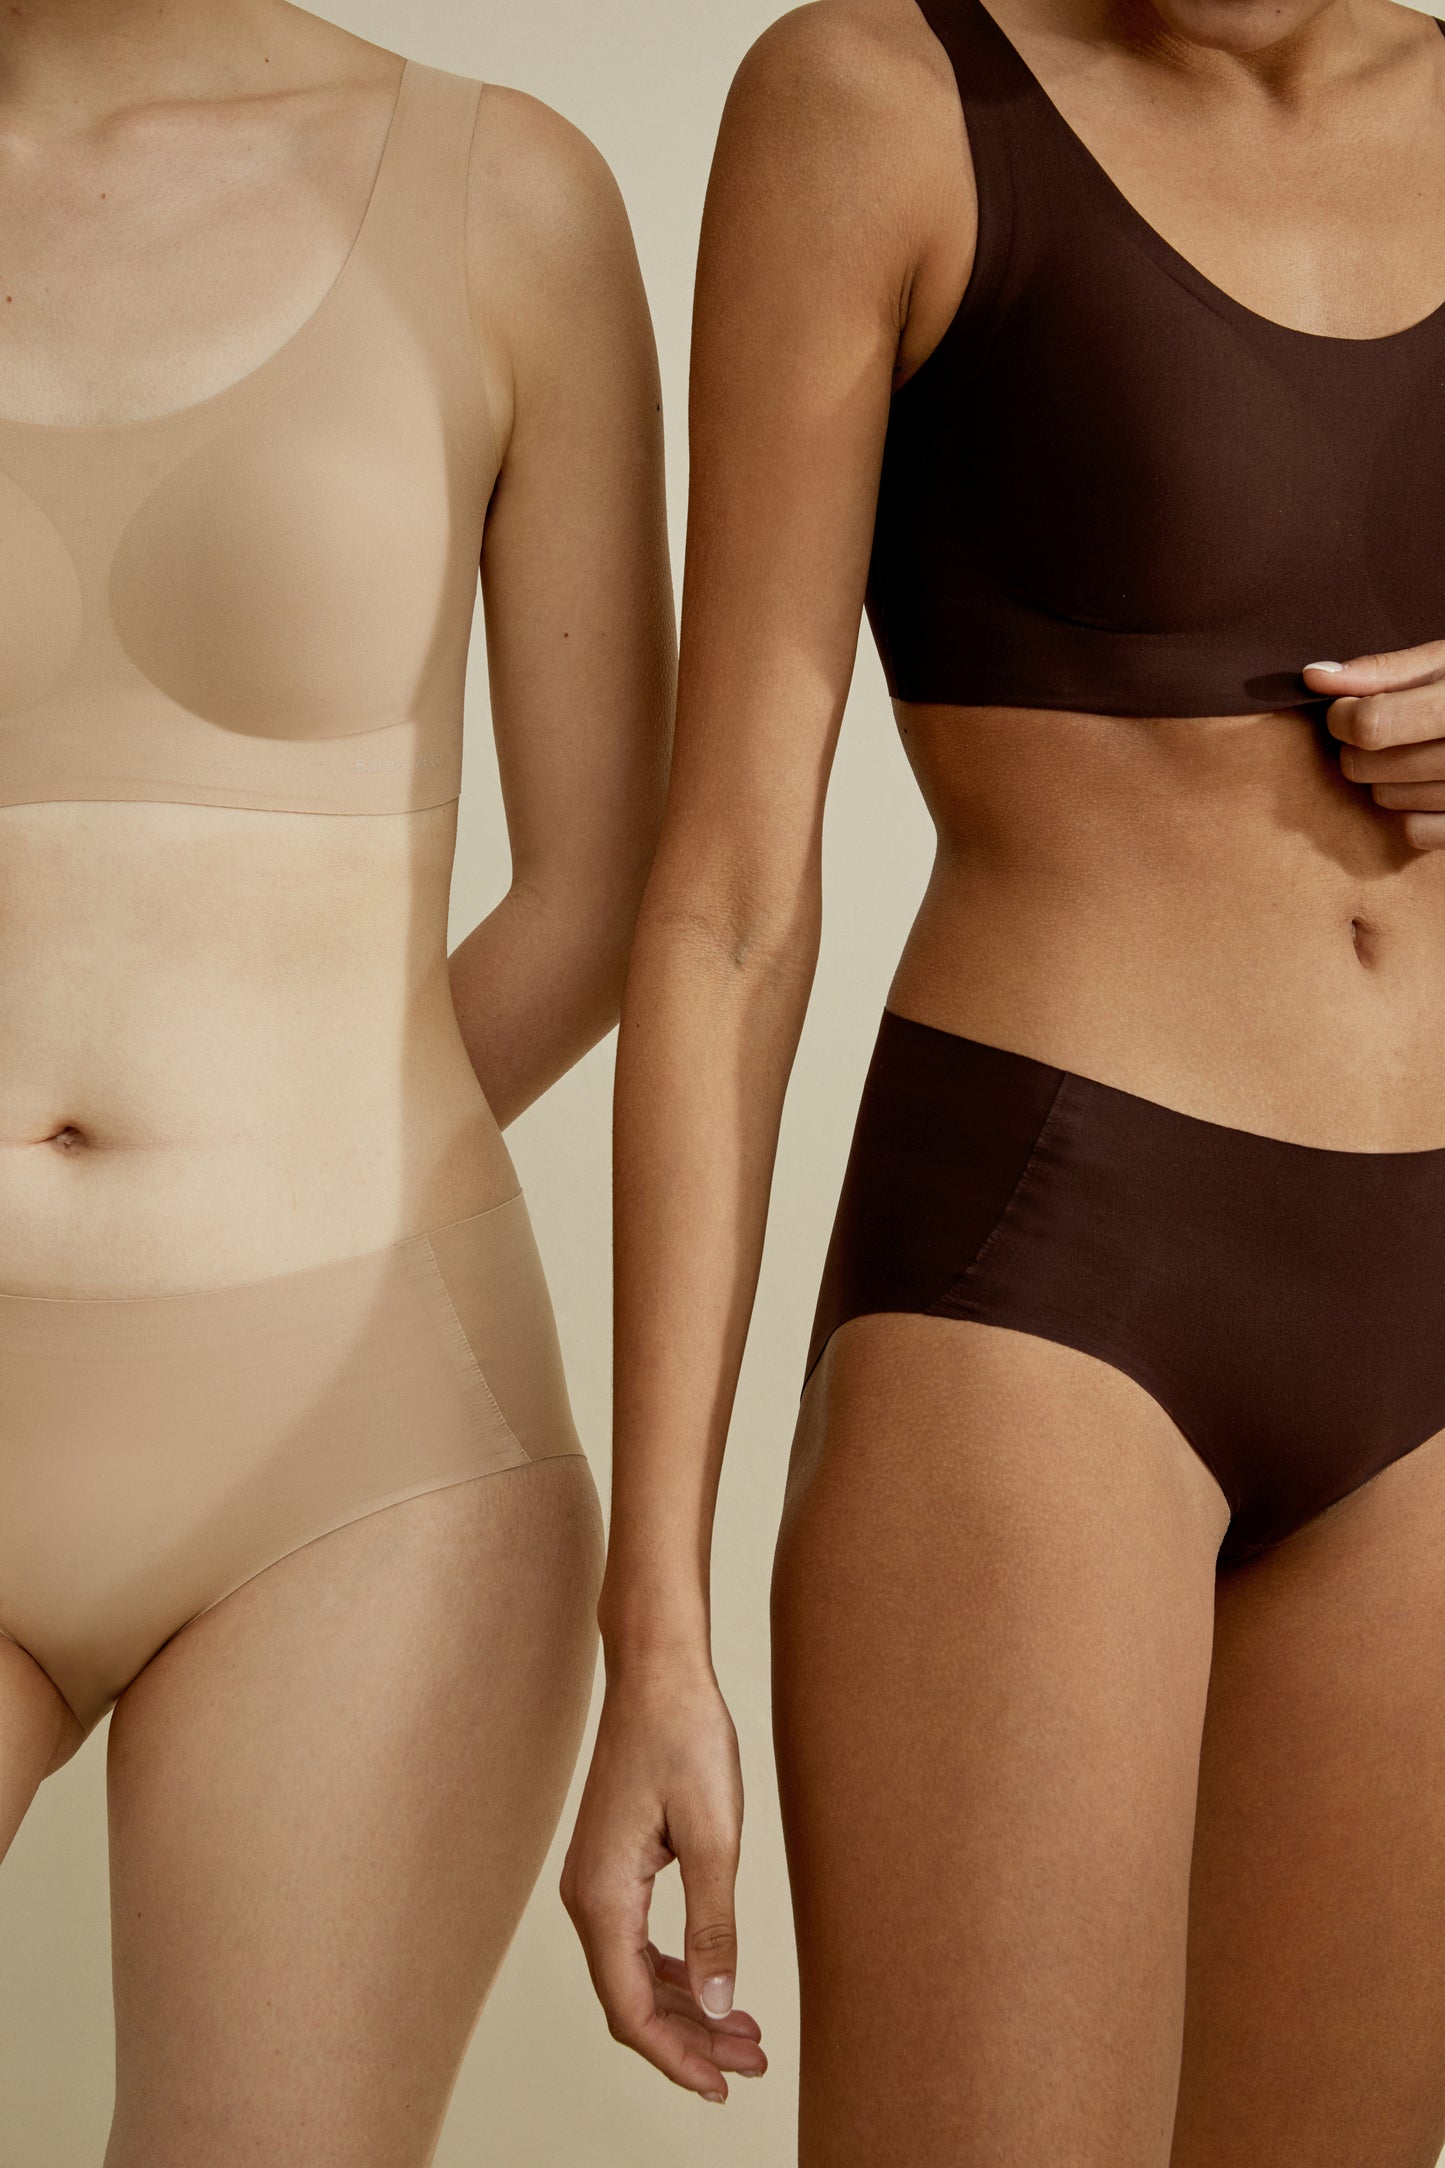 Two women in neutral-toned Barely Zero Classic Bra Bundles, one beige and one brown, standing side by side, showing midsections and thighs against a muted background.